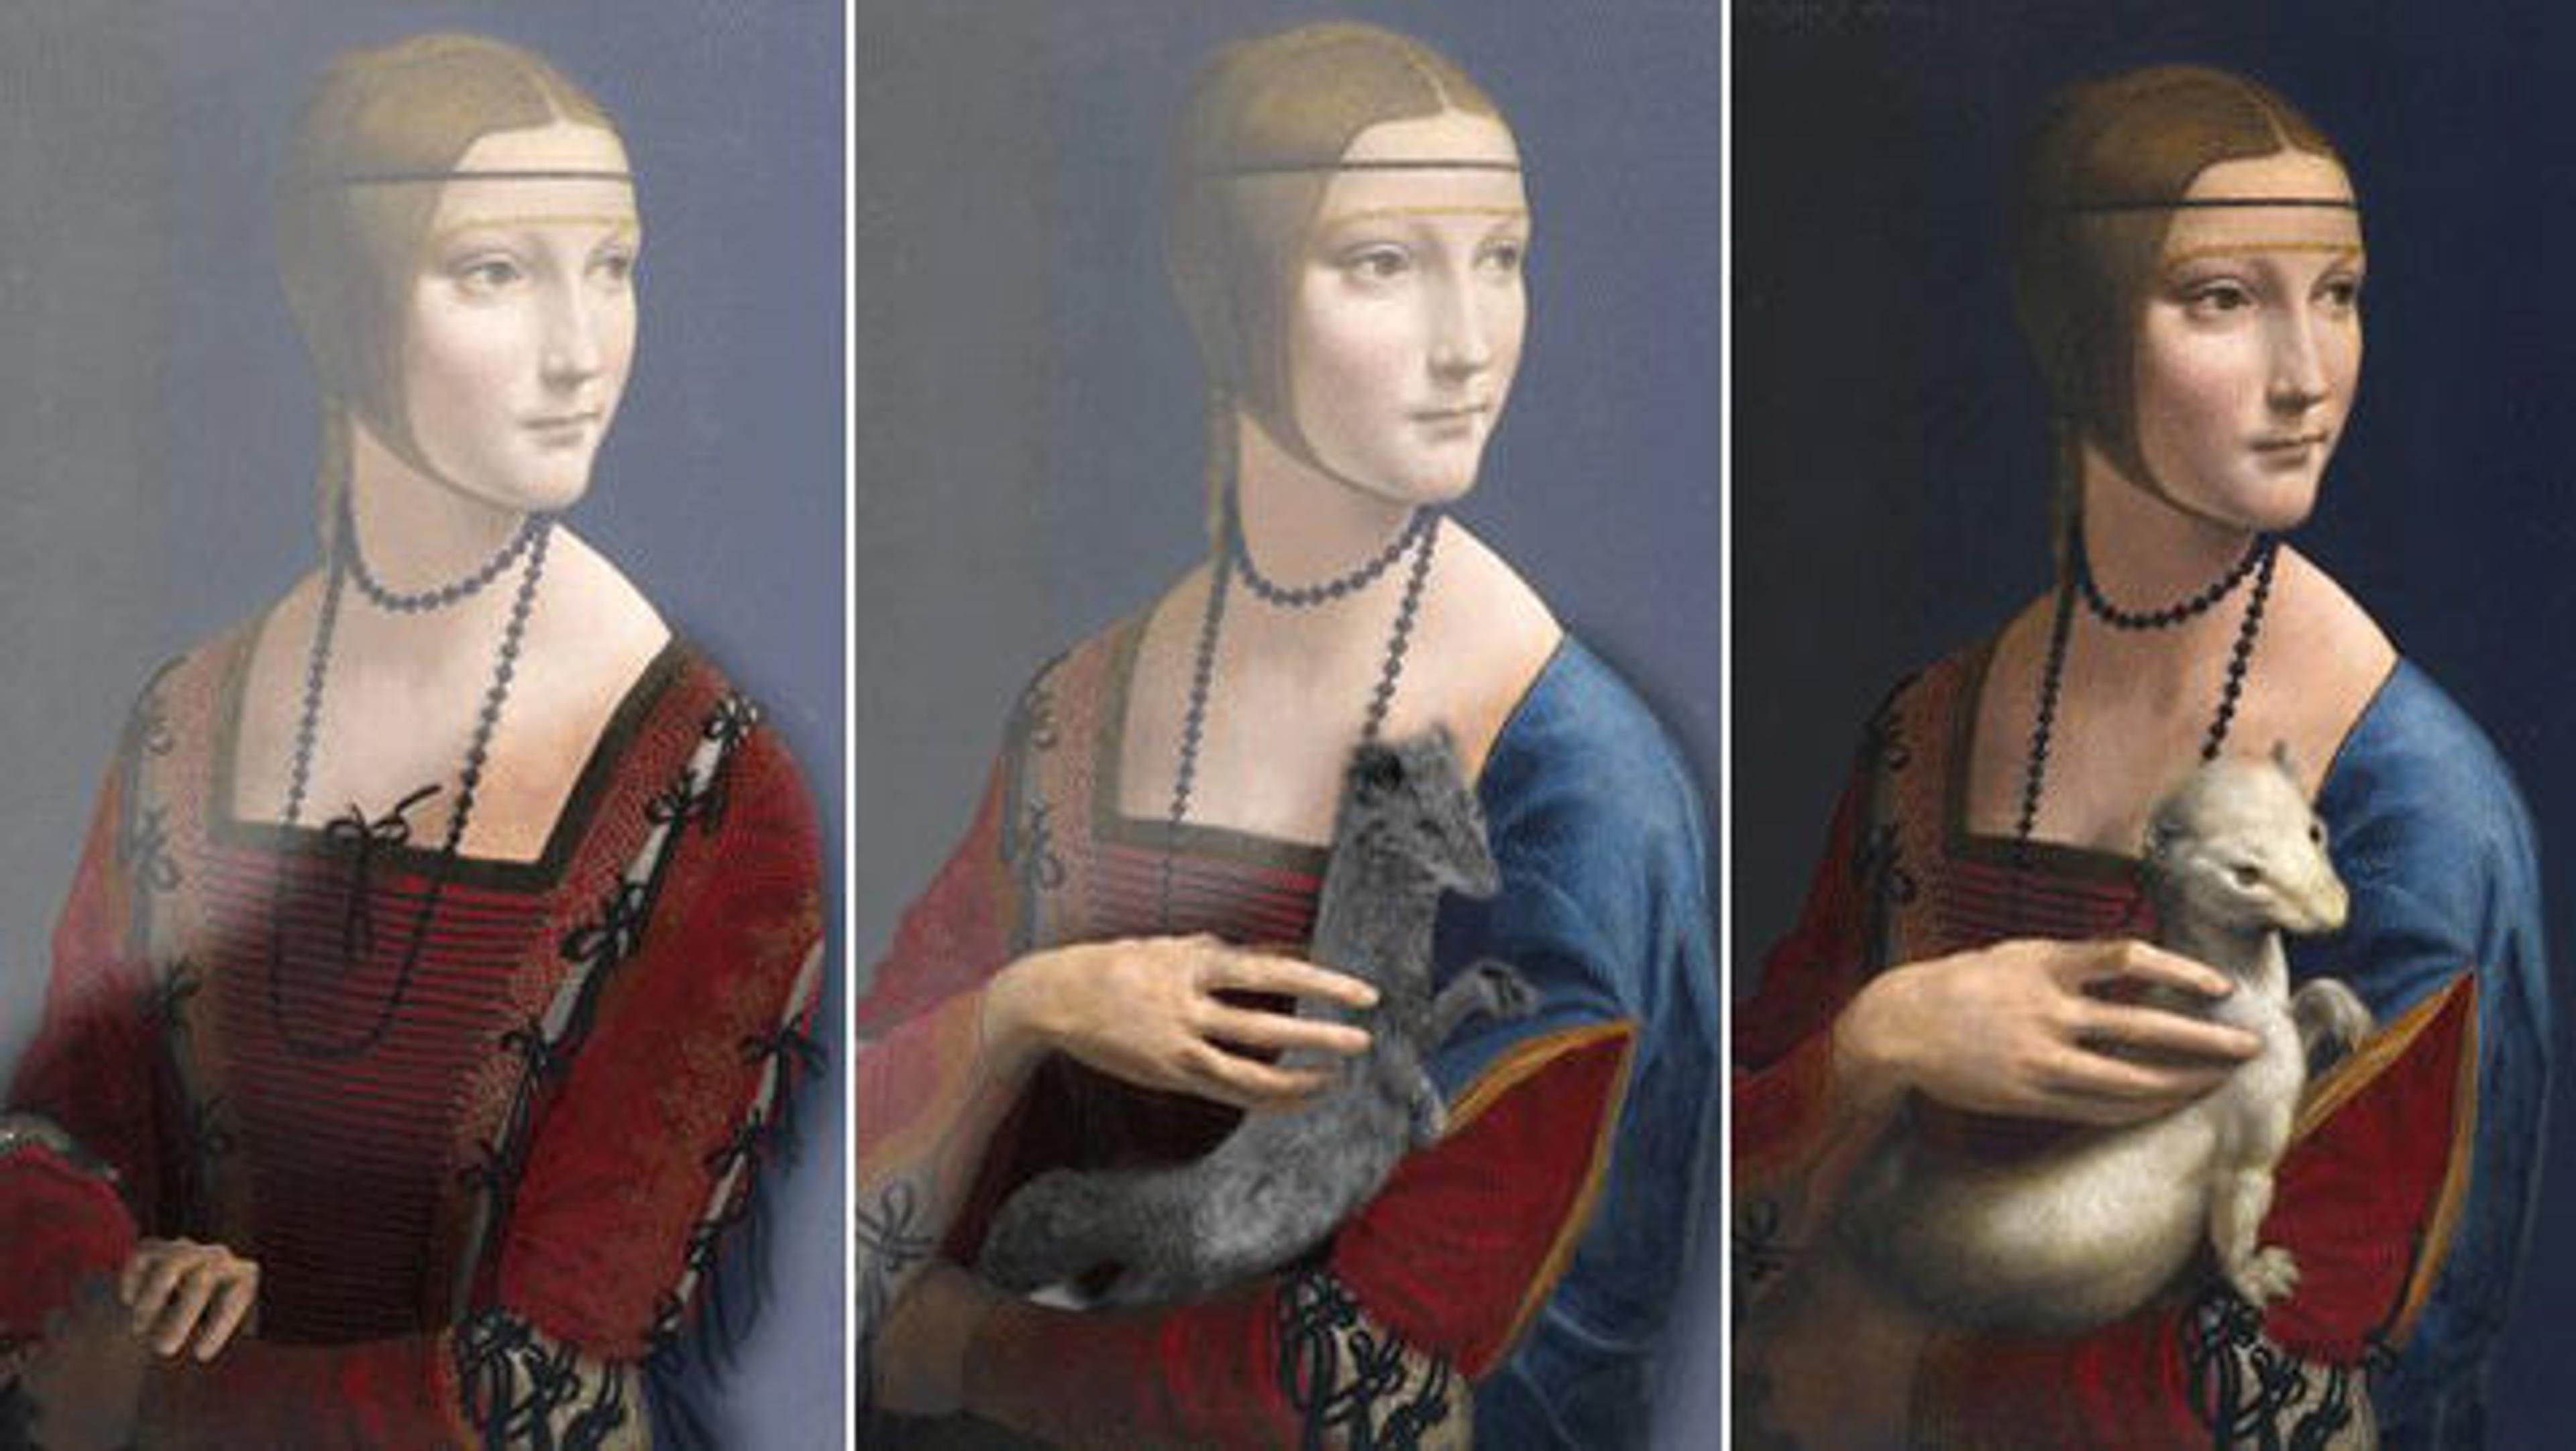 The three versions of Lady with an Ermine by Da Vinci. Image courtesy of the author